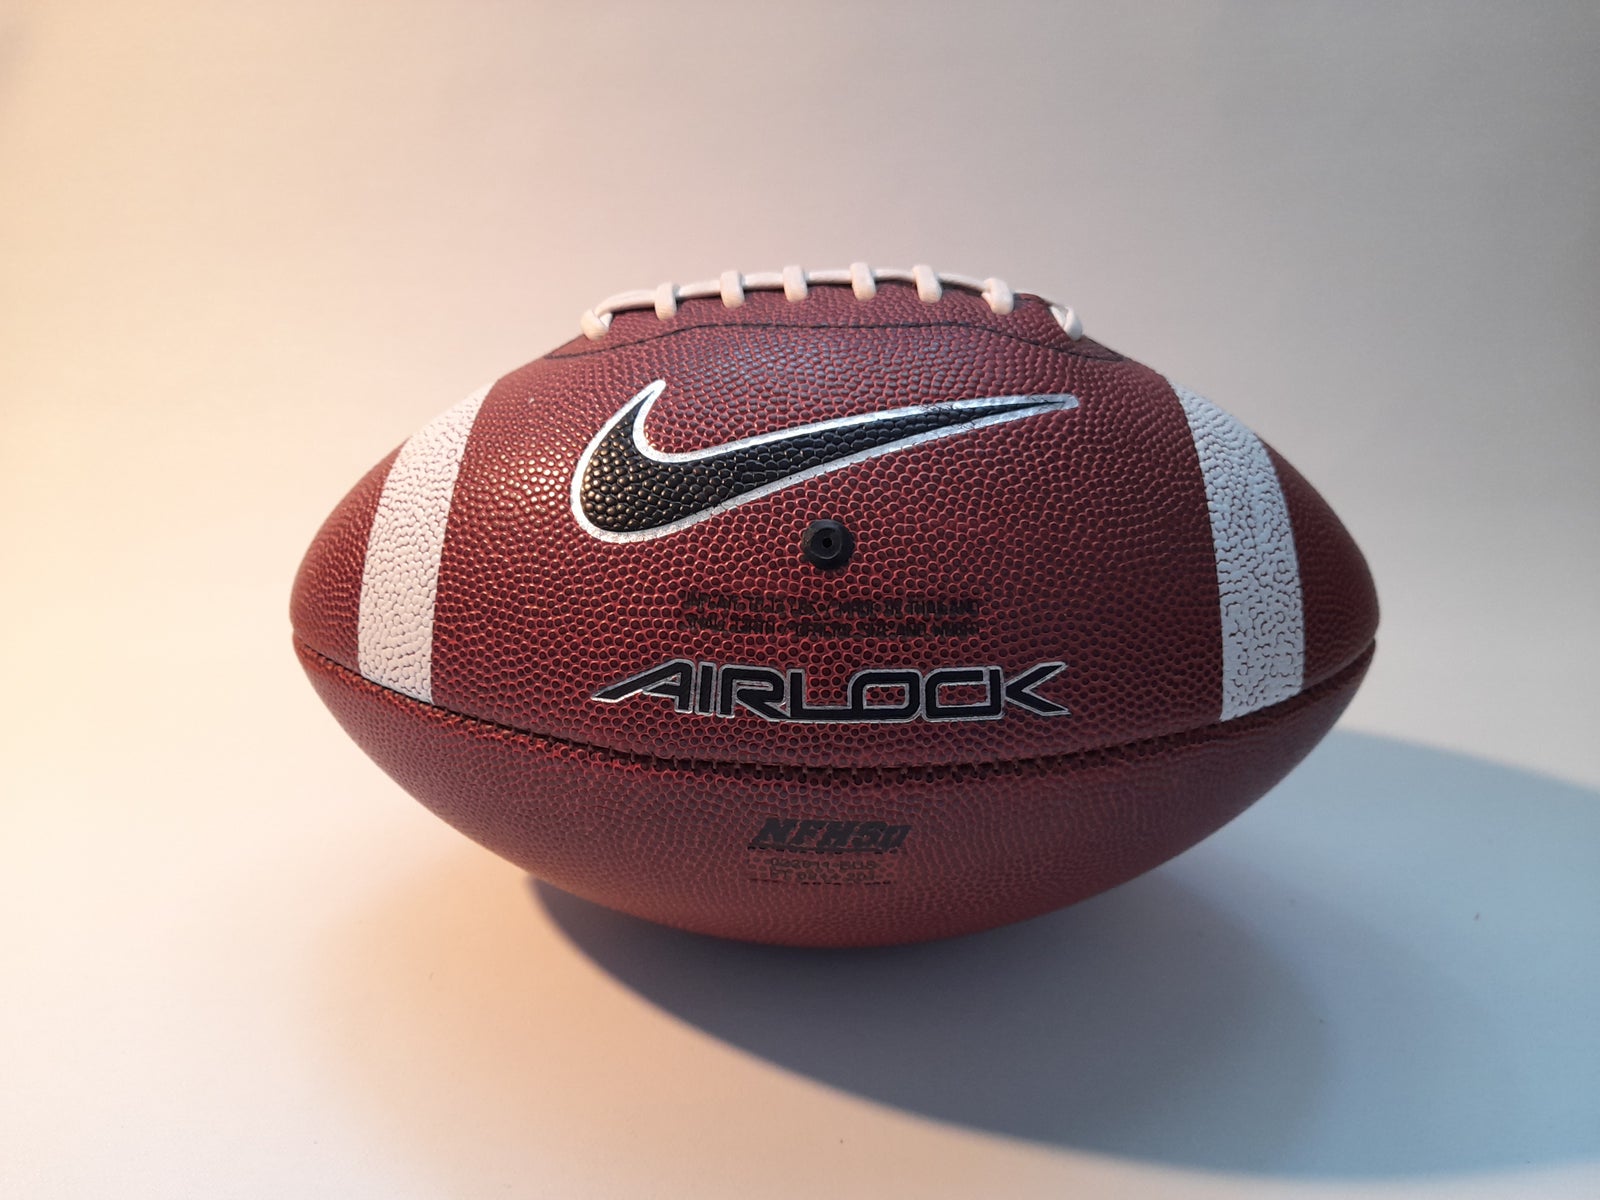 Andet, RUGBY BALL, NIKE